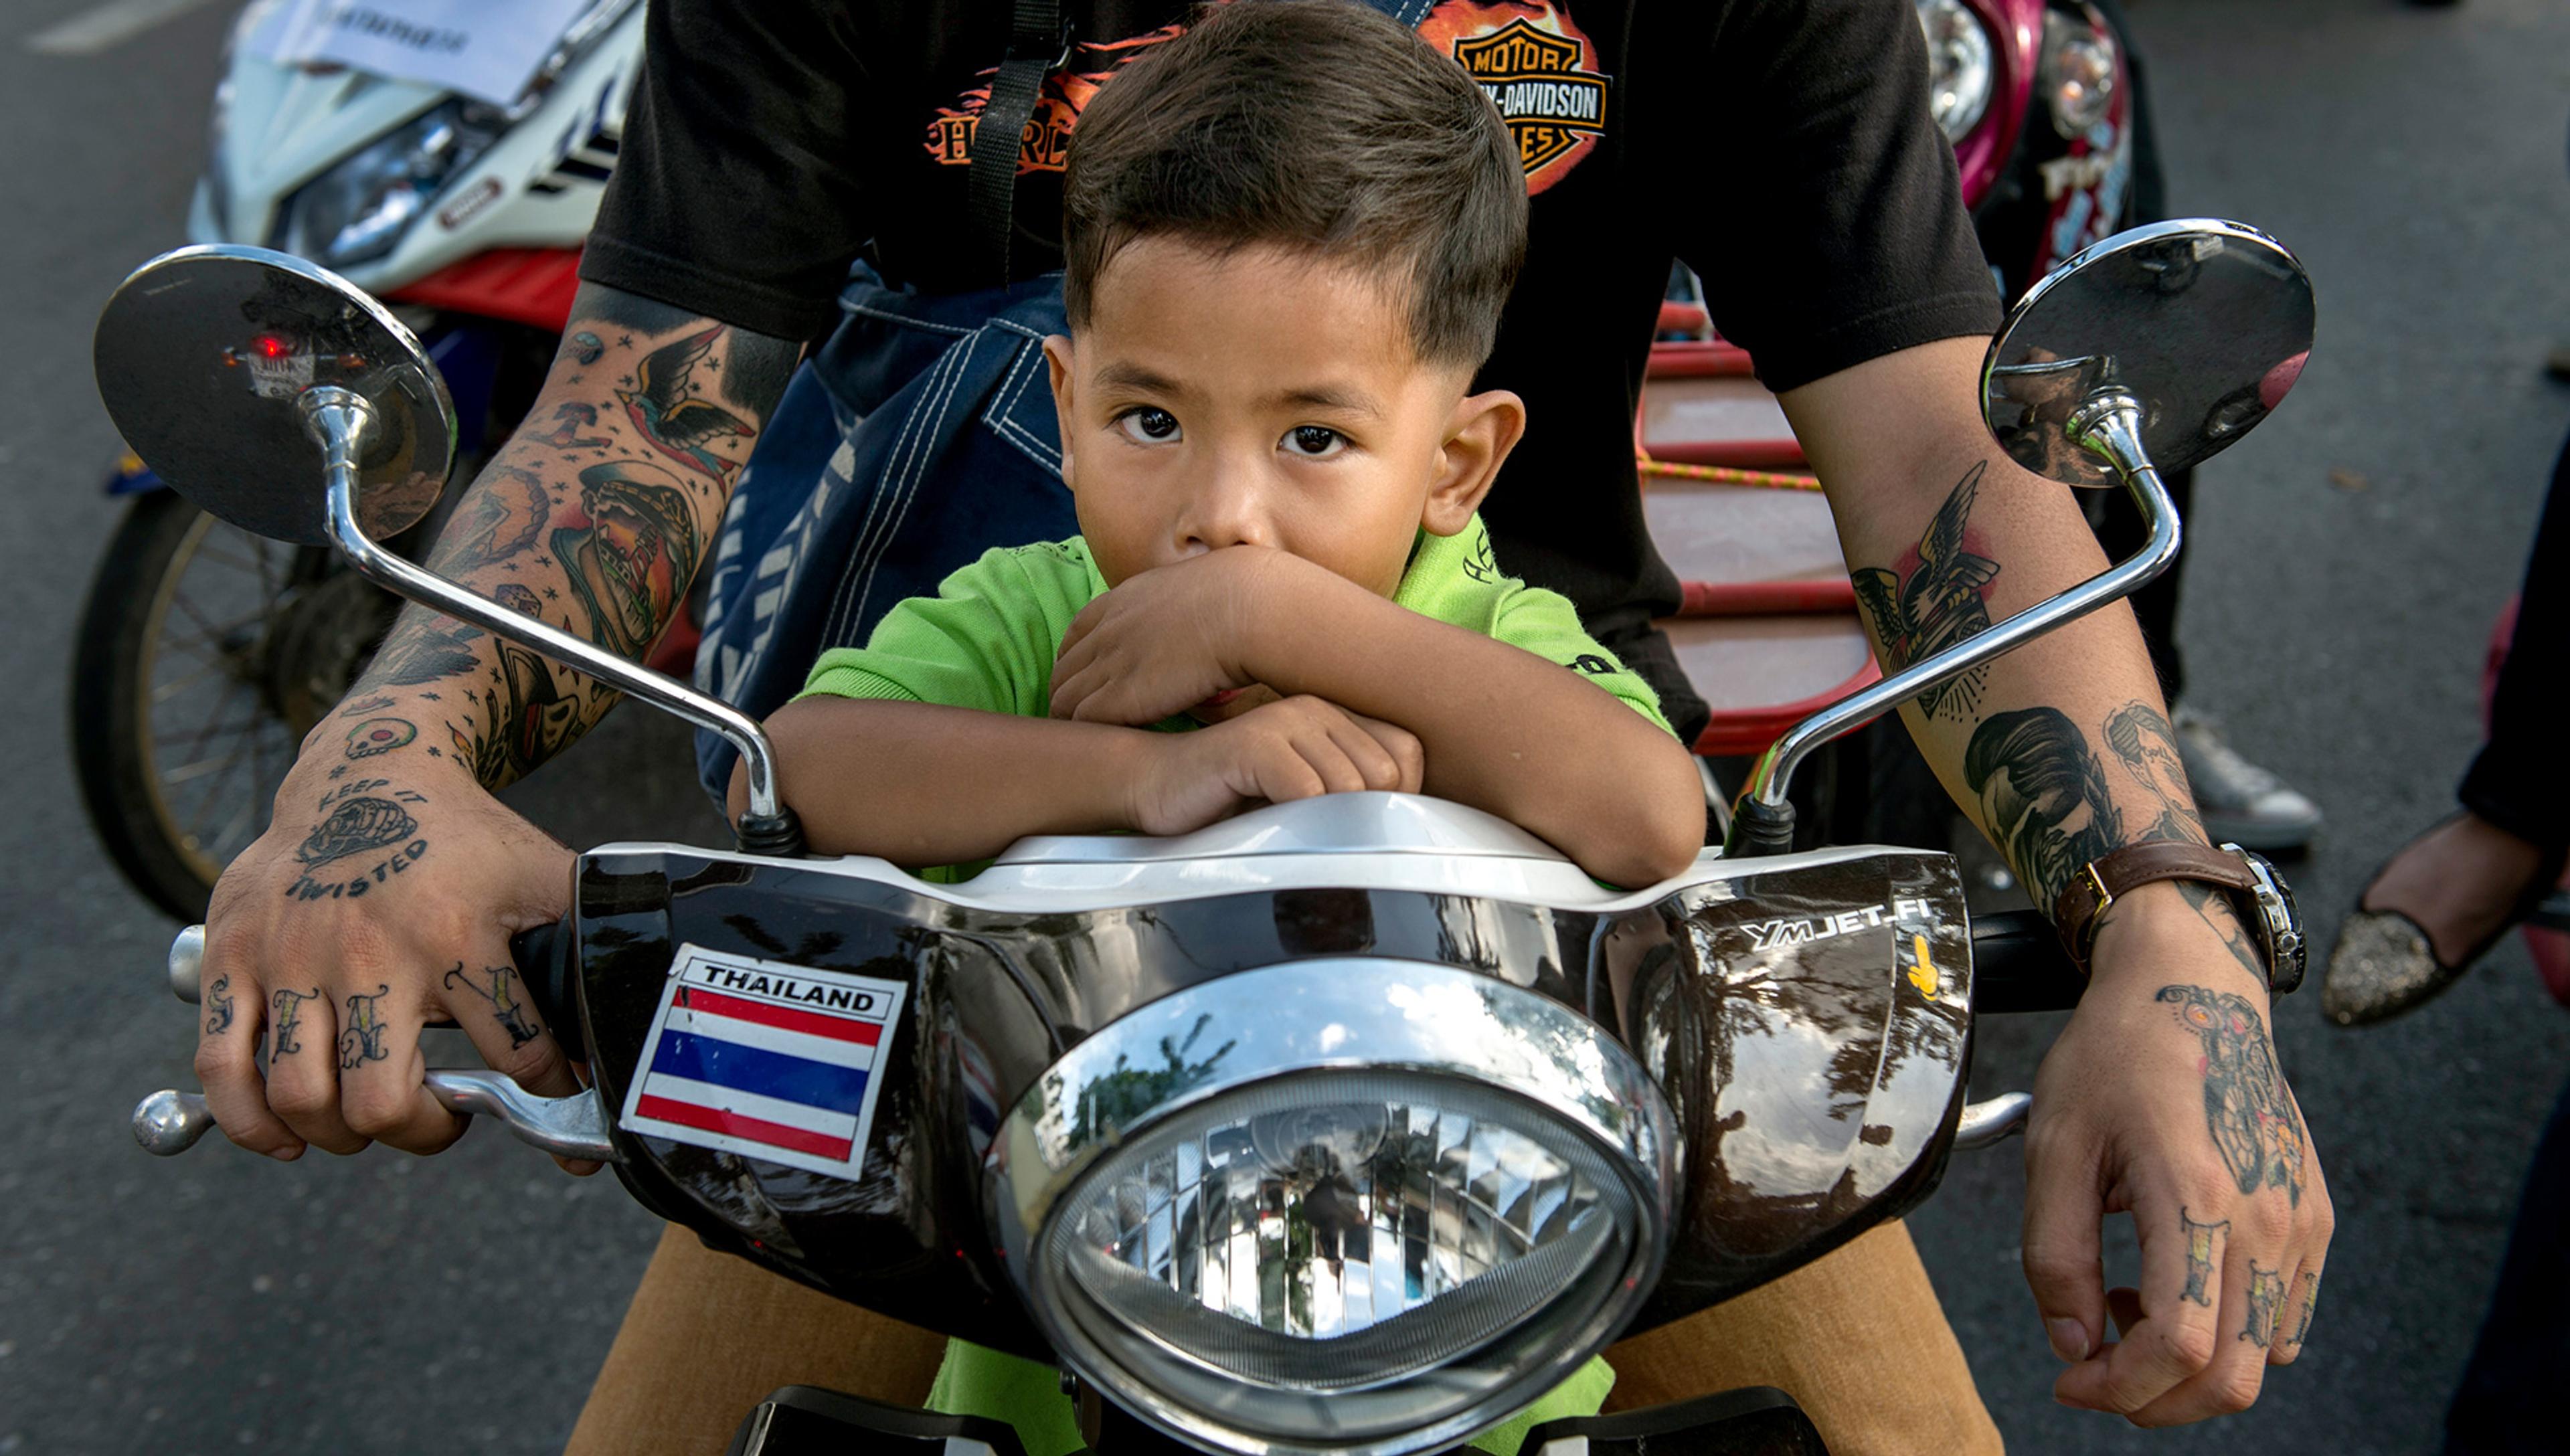 A young child passenger sits on the front of a motor scooter, with an older male rider partly visible behind. The rider has tattooed arms and a sign on the scooter reads ‘Thailand’